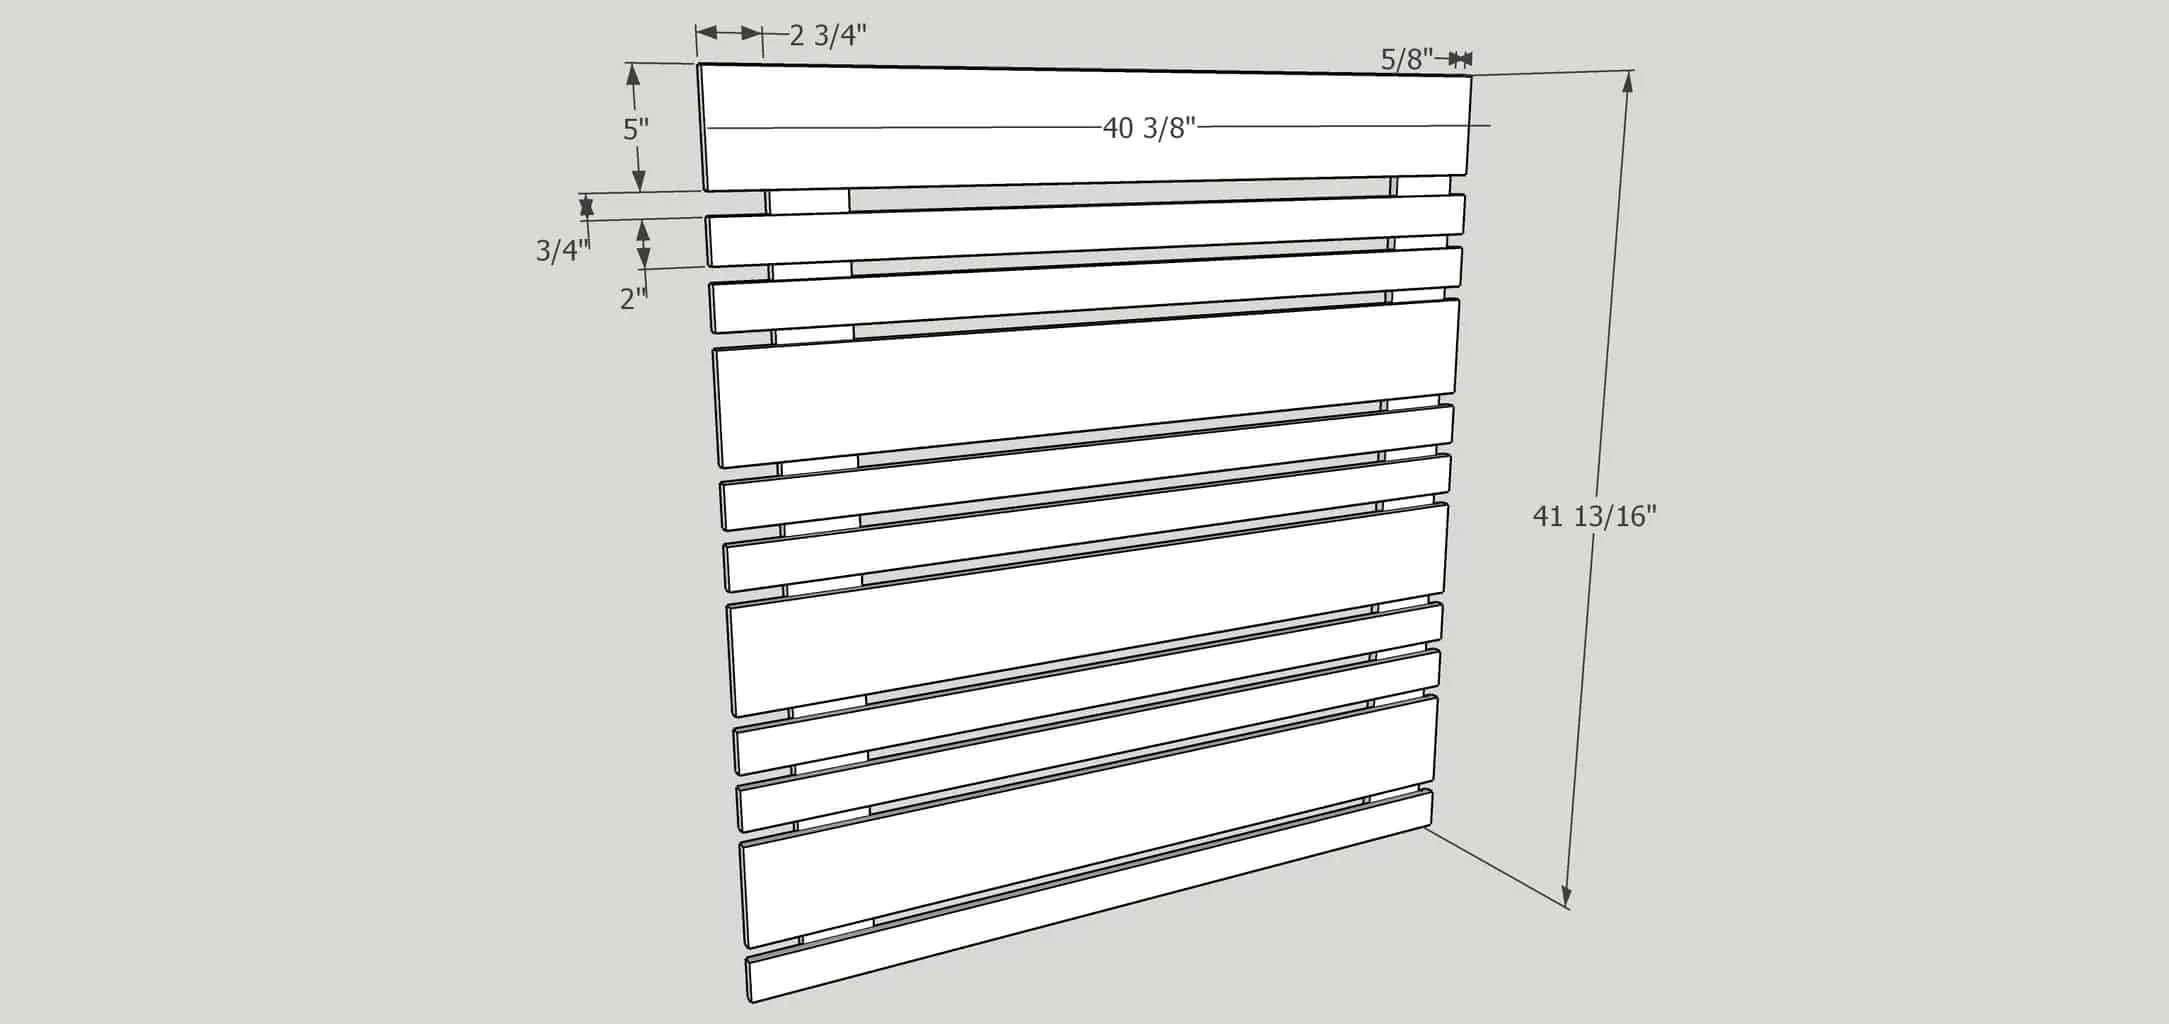 removable fence panel dimensions